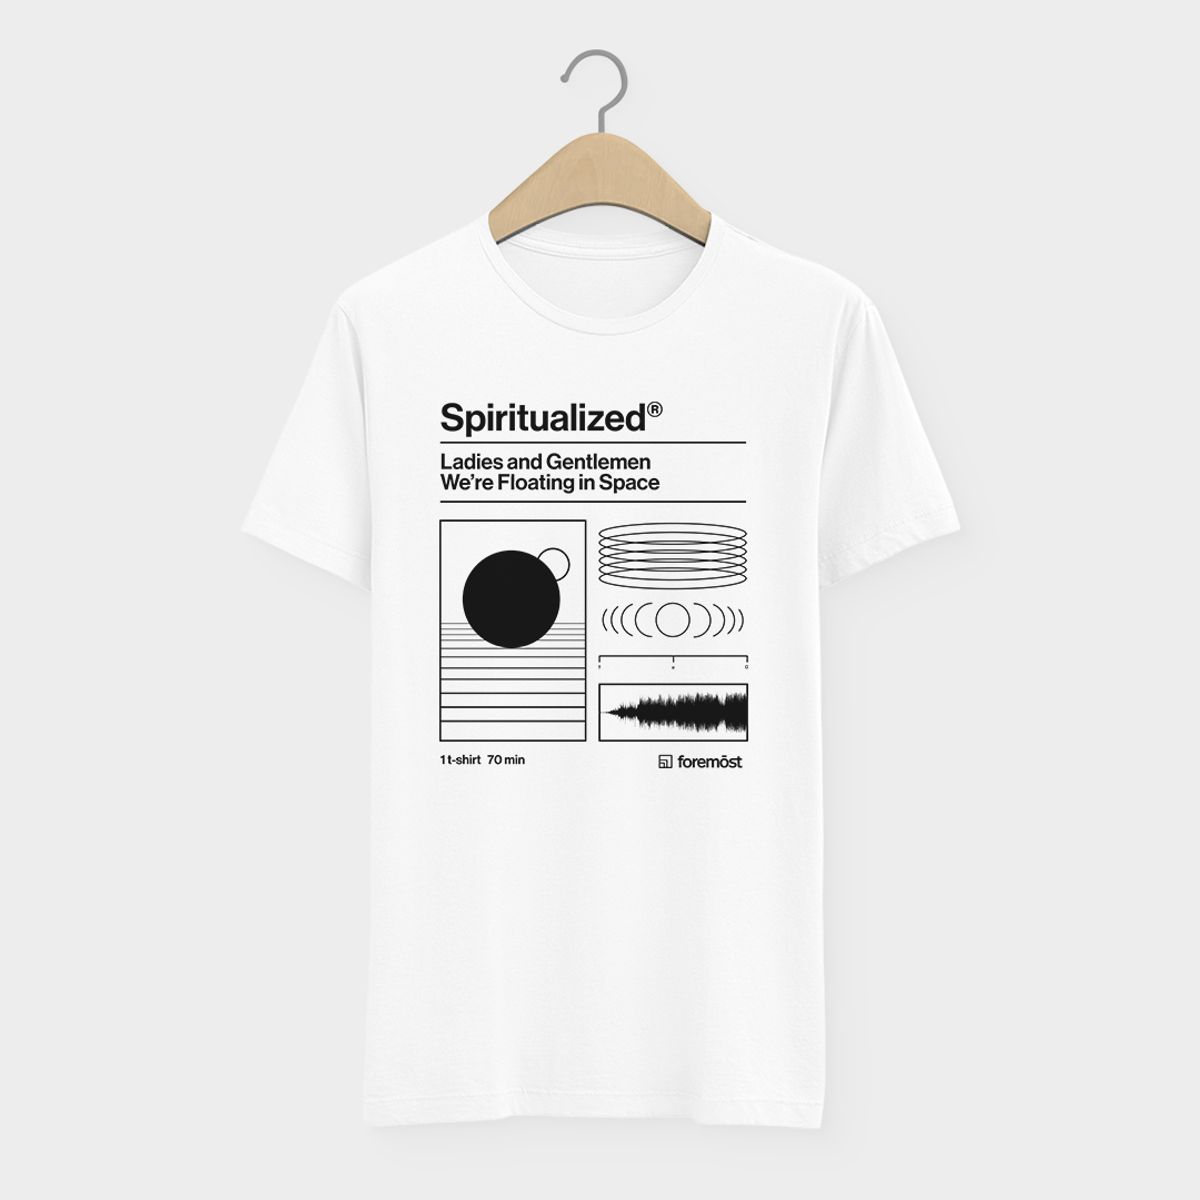 Nome do produto: Camiseta Spiritualized  Ladies and Gentlemen We Are Floating in Space